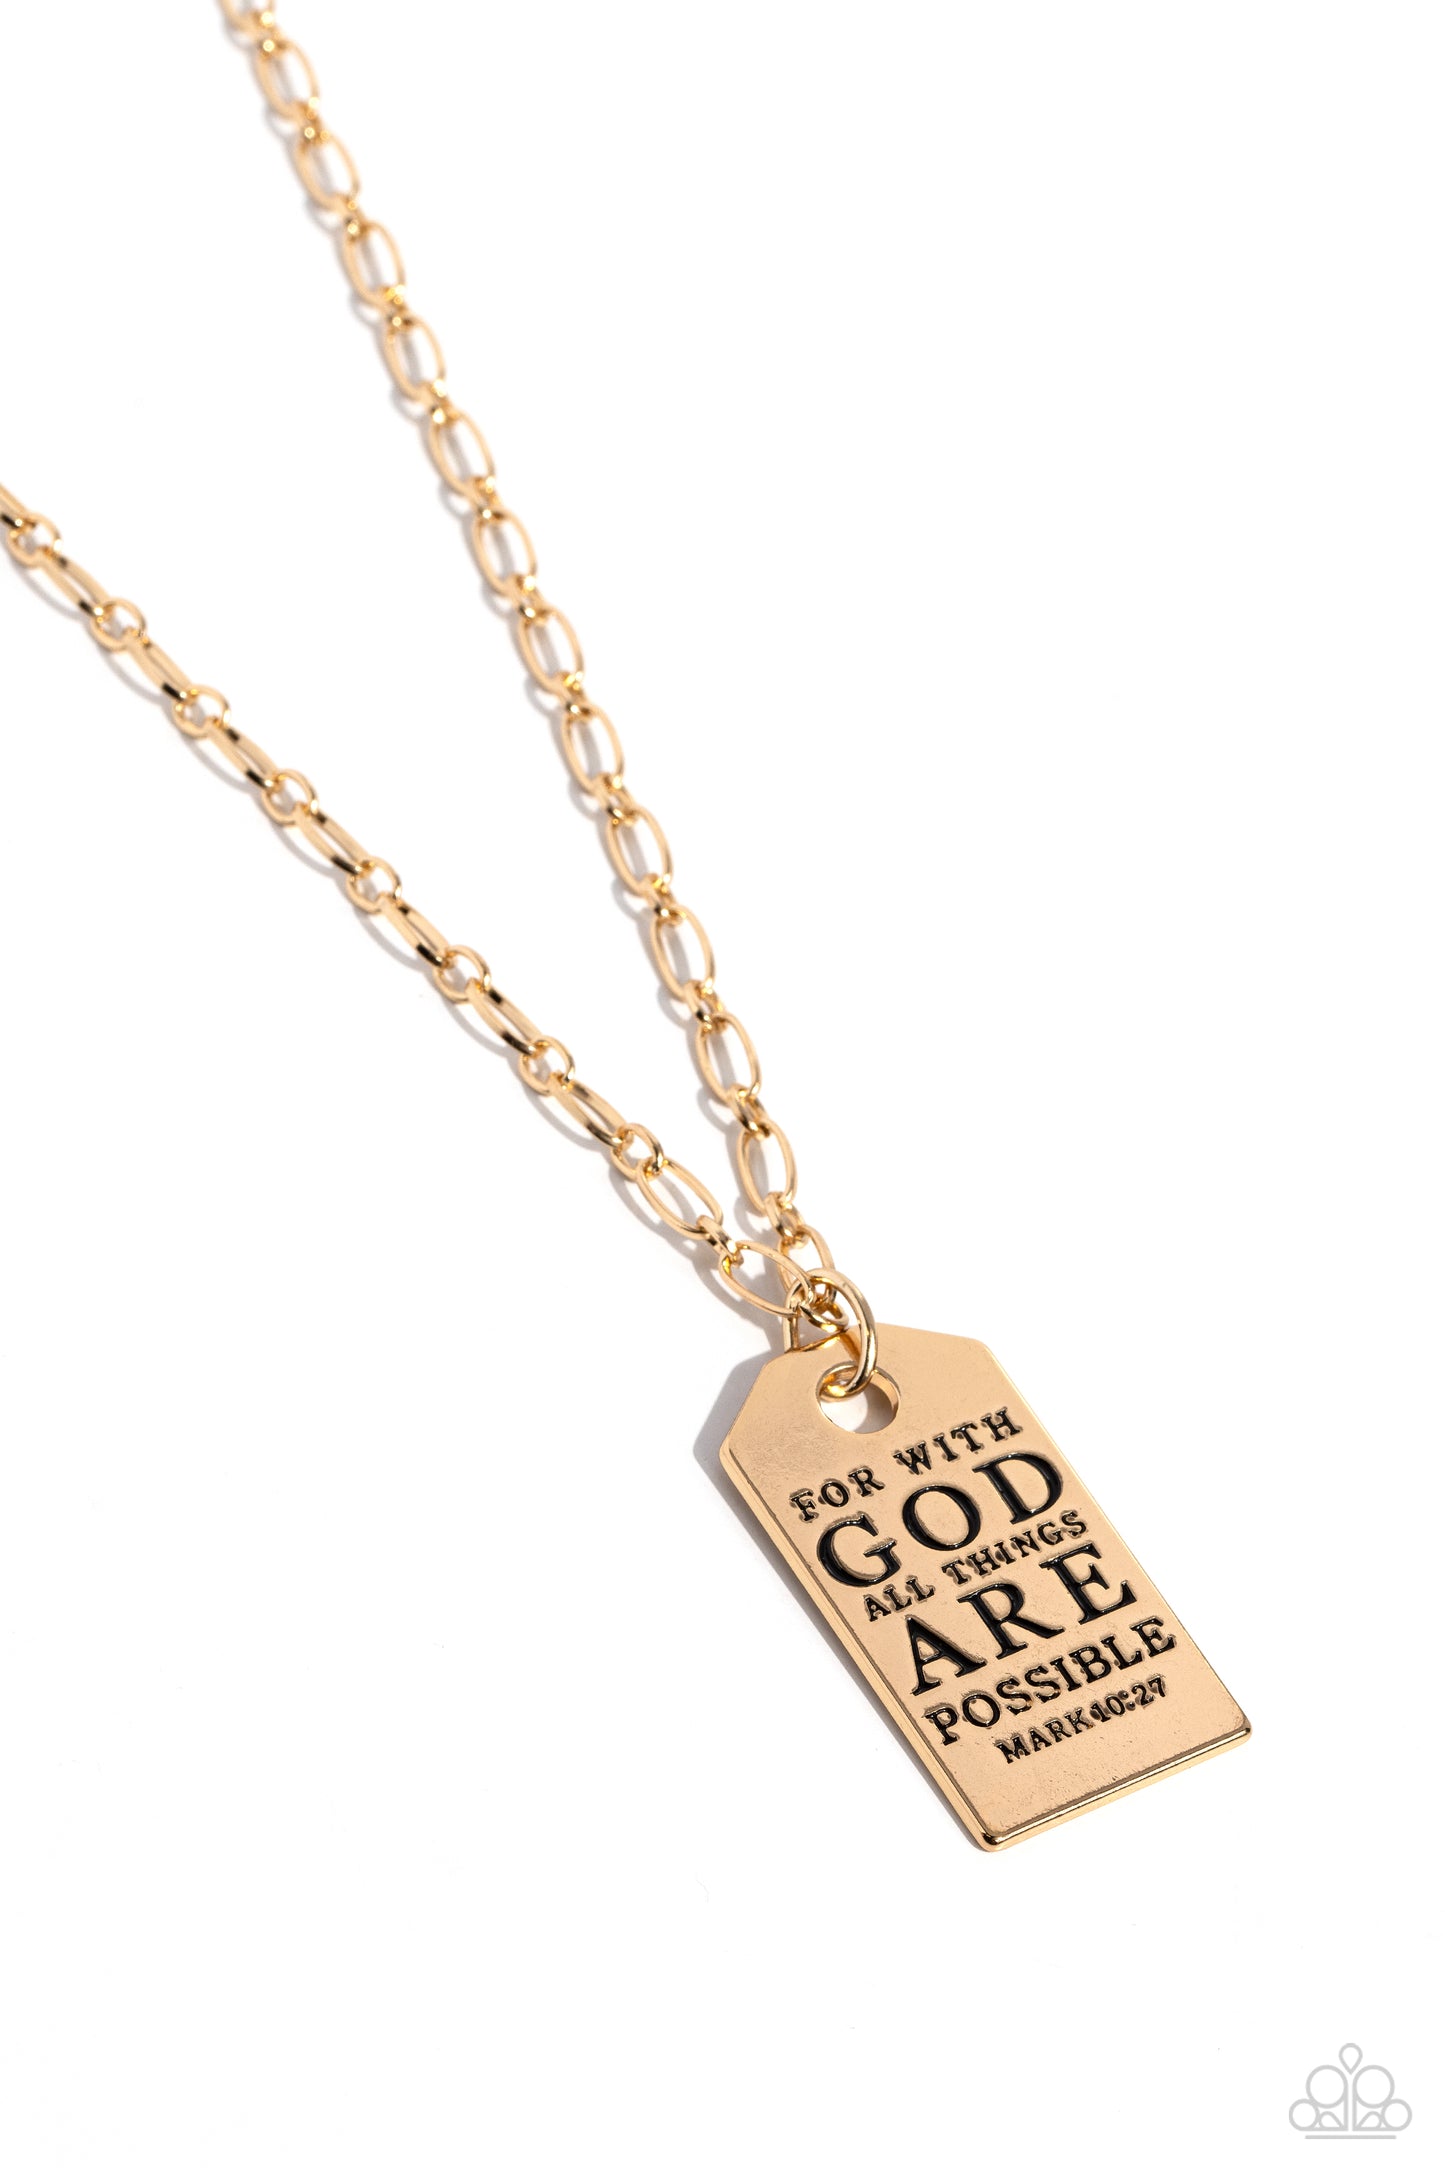 Dangling from simple golden links, a sleek gold hoop boosts a rounded rectangular plate. Stamped on the high-sheen gold pendant, the inspiring phrase "For with GOD all things ARE possible" is listed with the scripture reference "Mark 10:27" just below it in a more dainty font for a hopeful finish. Features an adjustable clasp closure.  Sold as one individual necklace. Includes one pair of matching earrings.